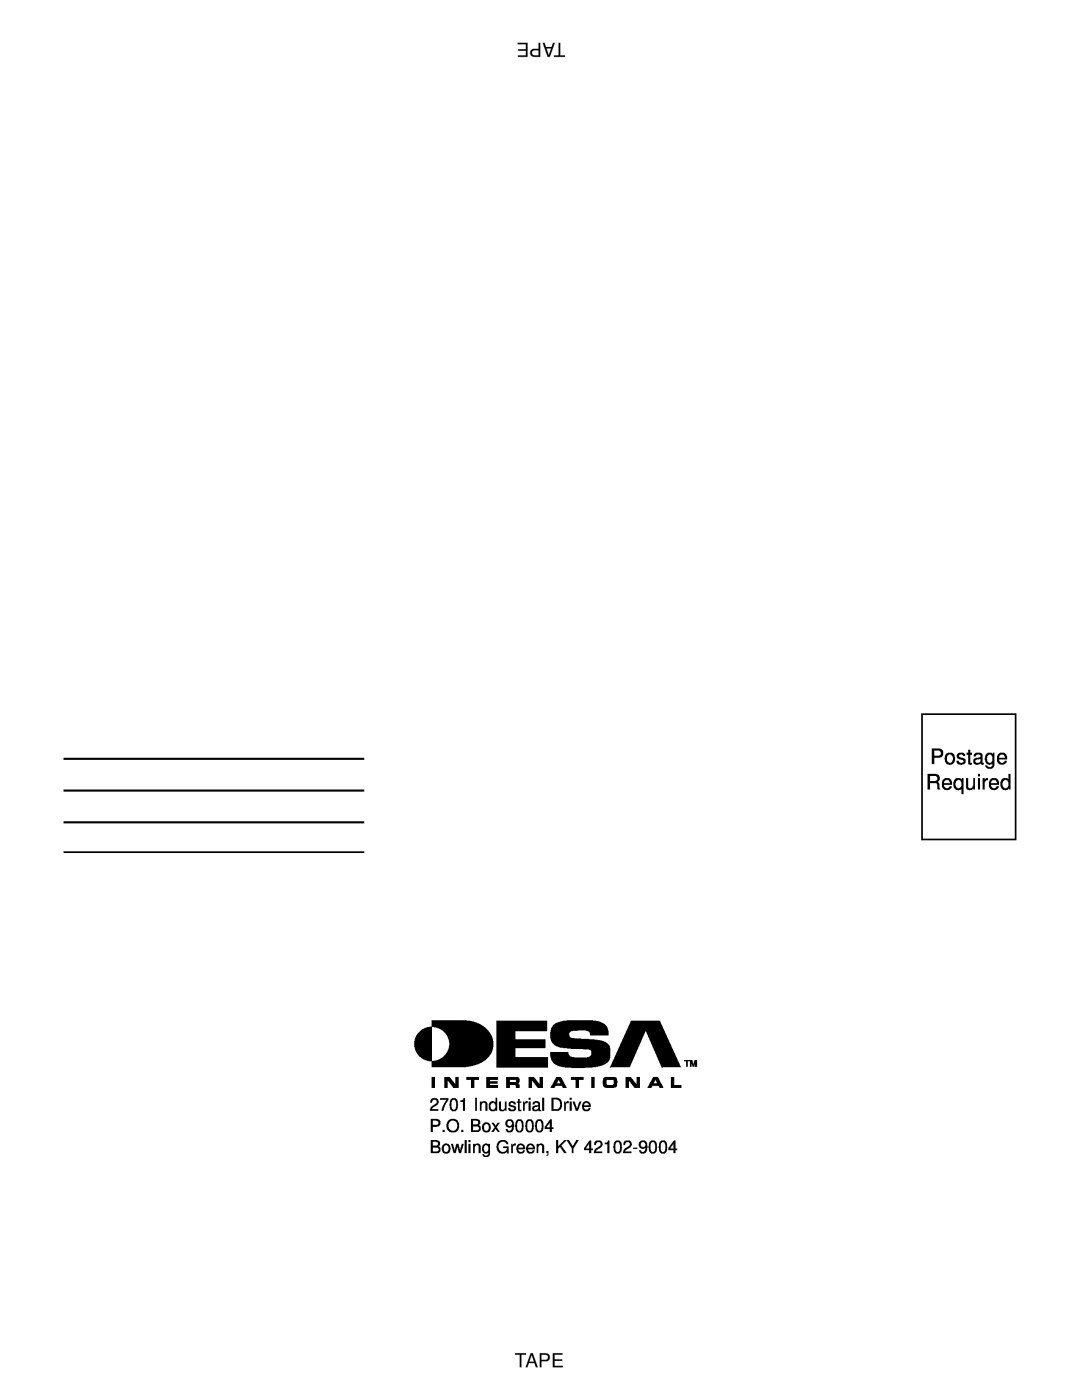 Desa VN10A installation manual Tape, Industrial Drive P.O. Box Bowling Green, KY, Postage Required 